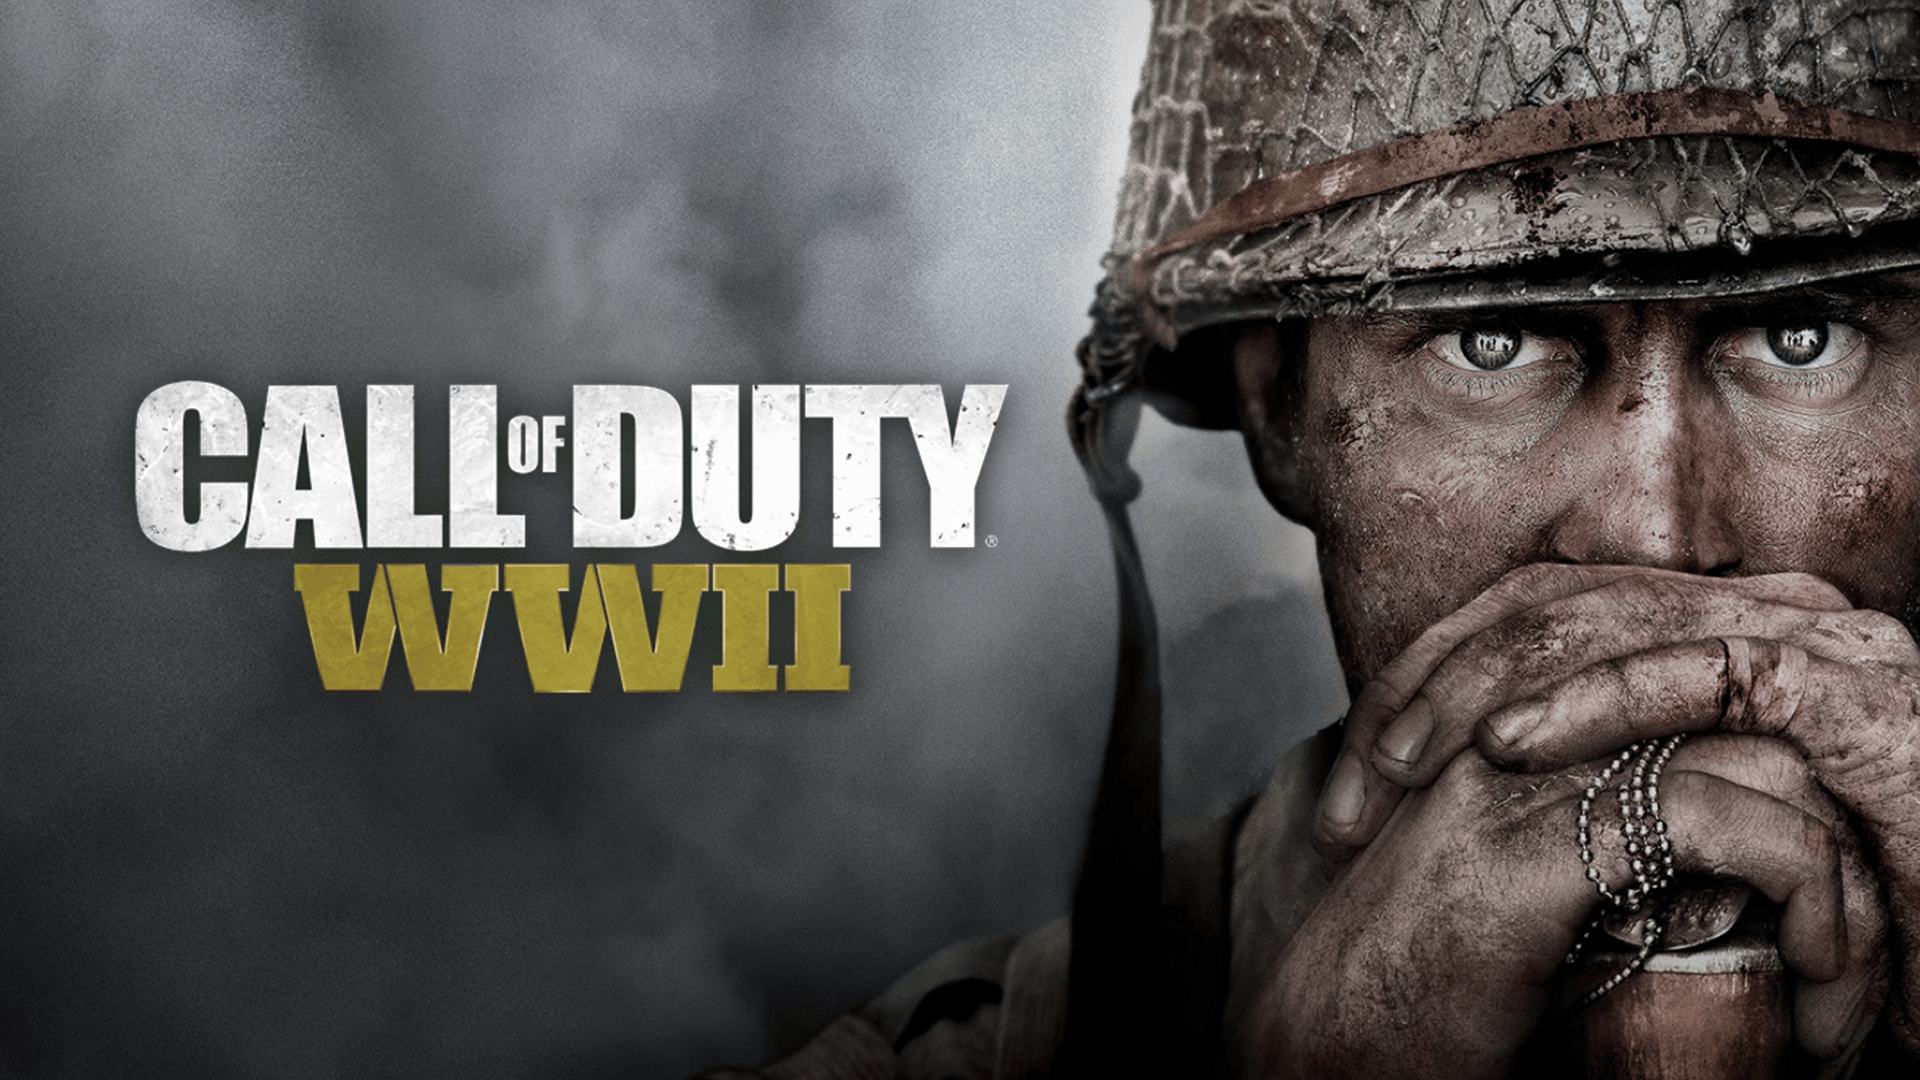 Best Call of Duty Games - Call of Duty WWII